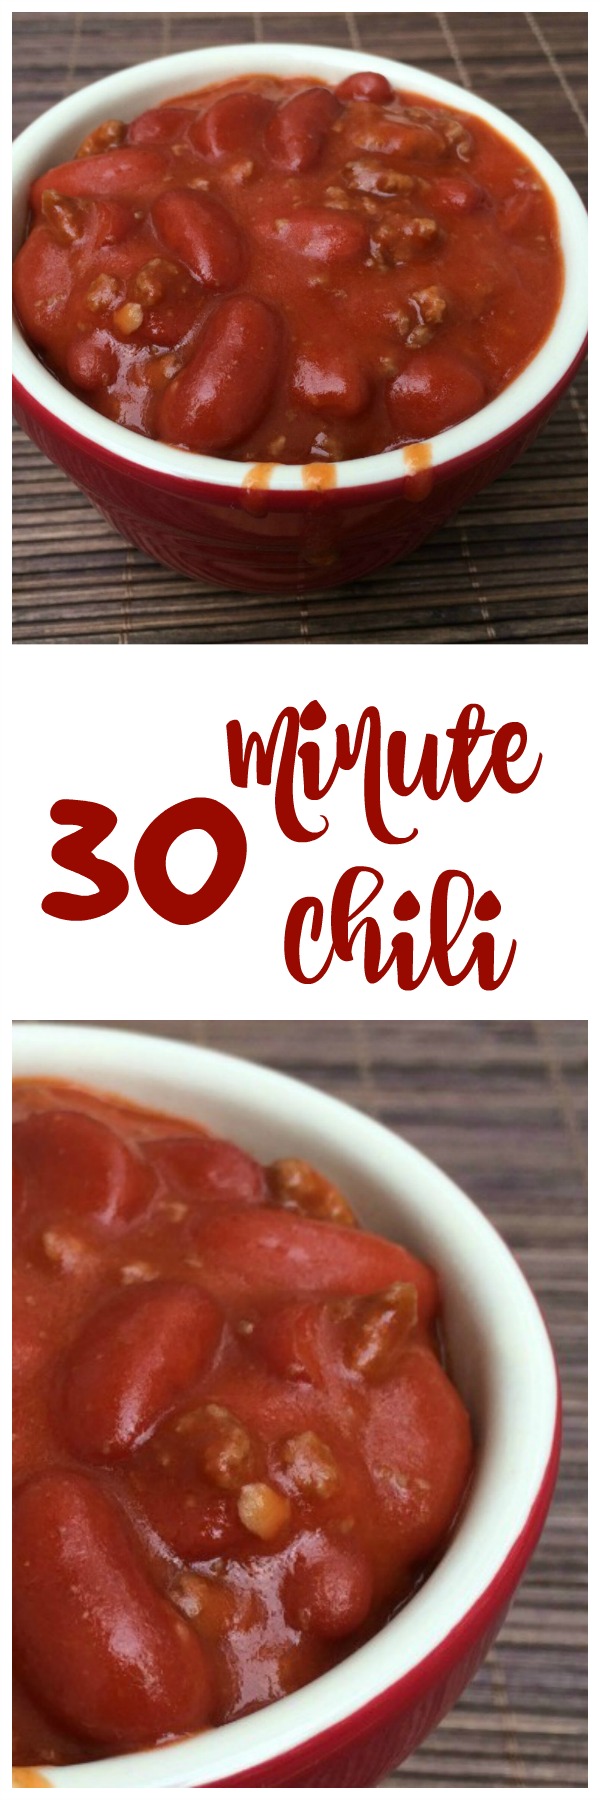 This 30 Minute Chili Recipe is the perfect comfort food on a cold winter day!  